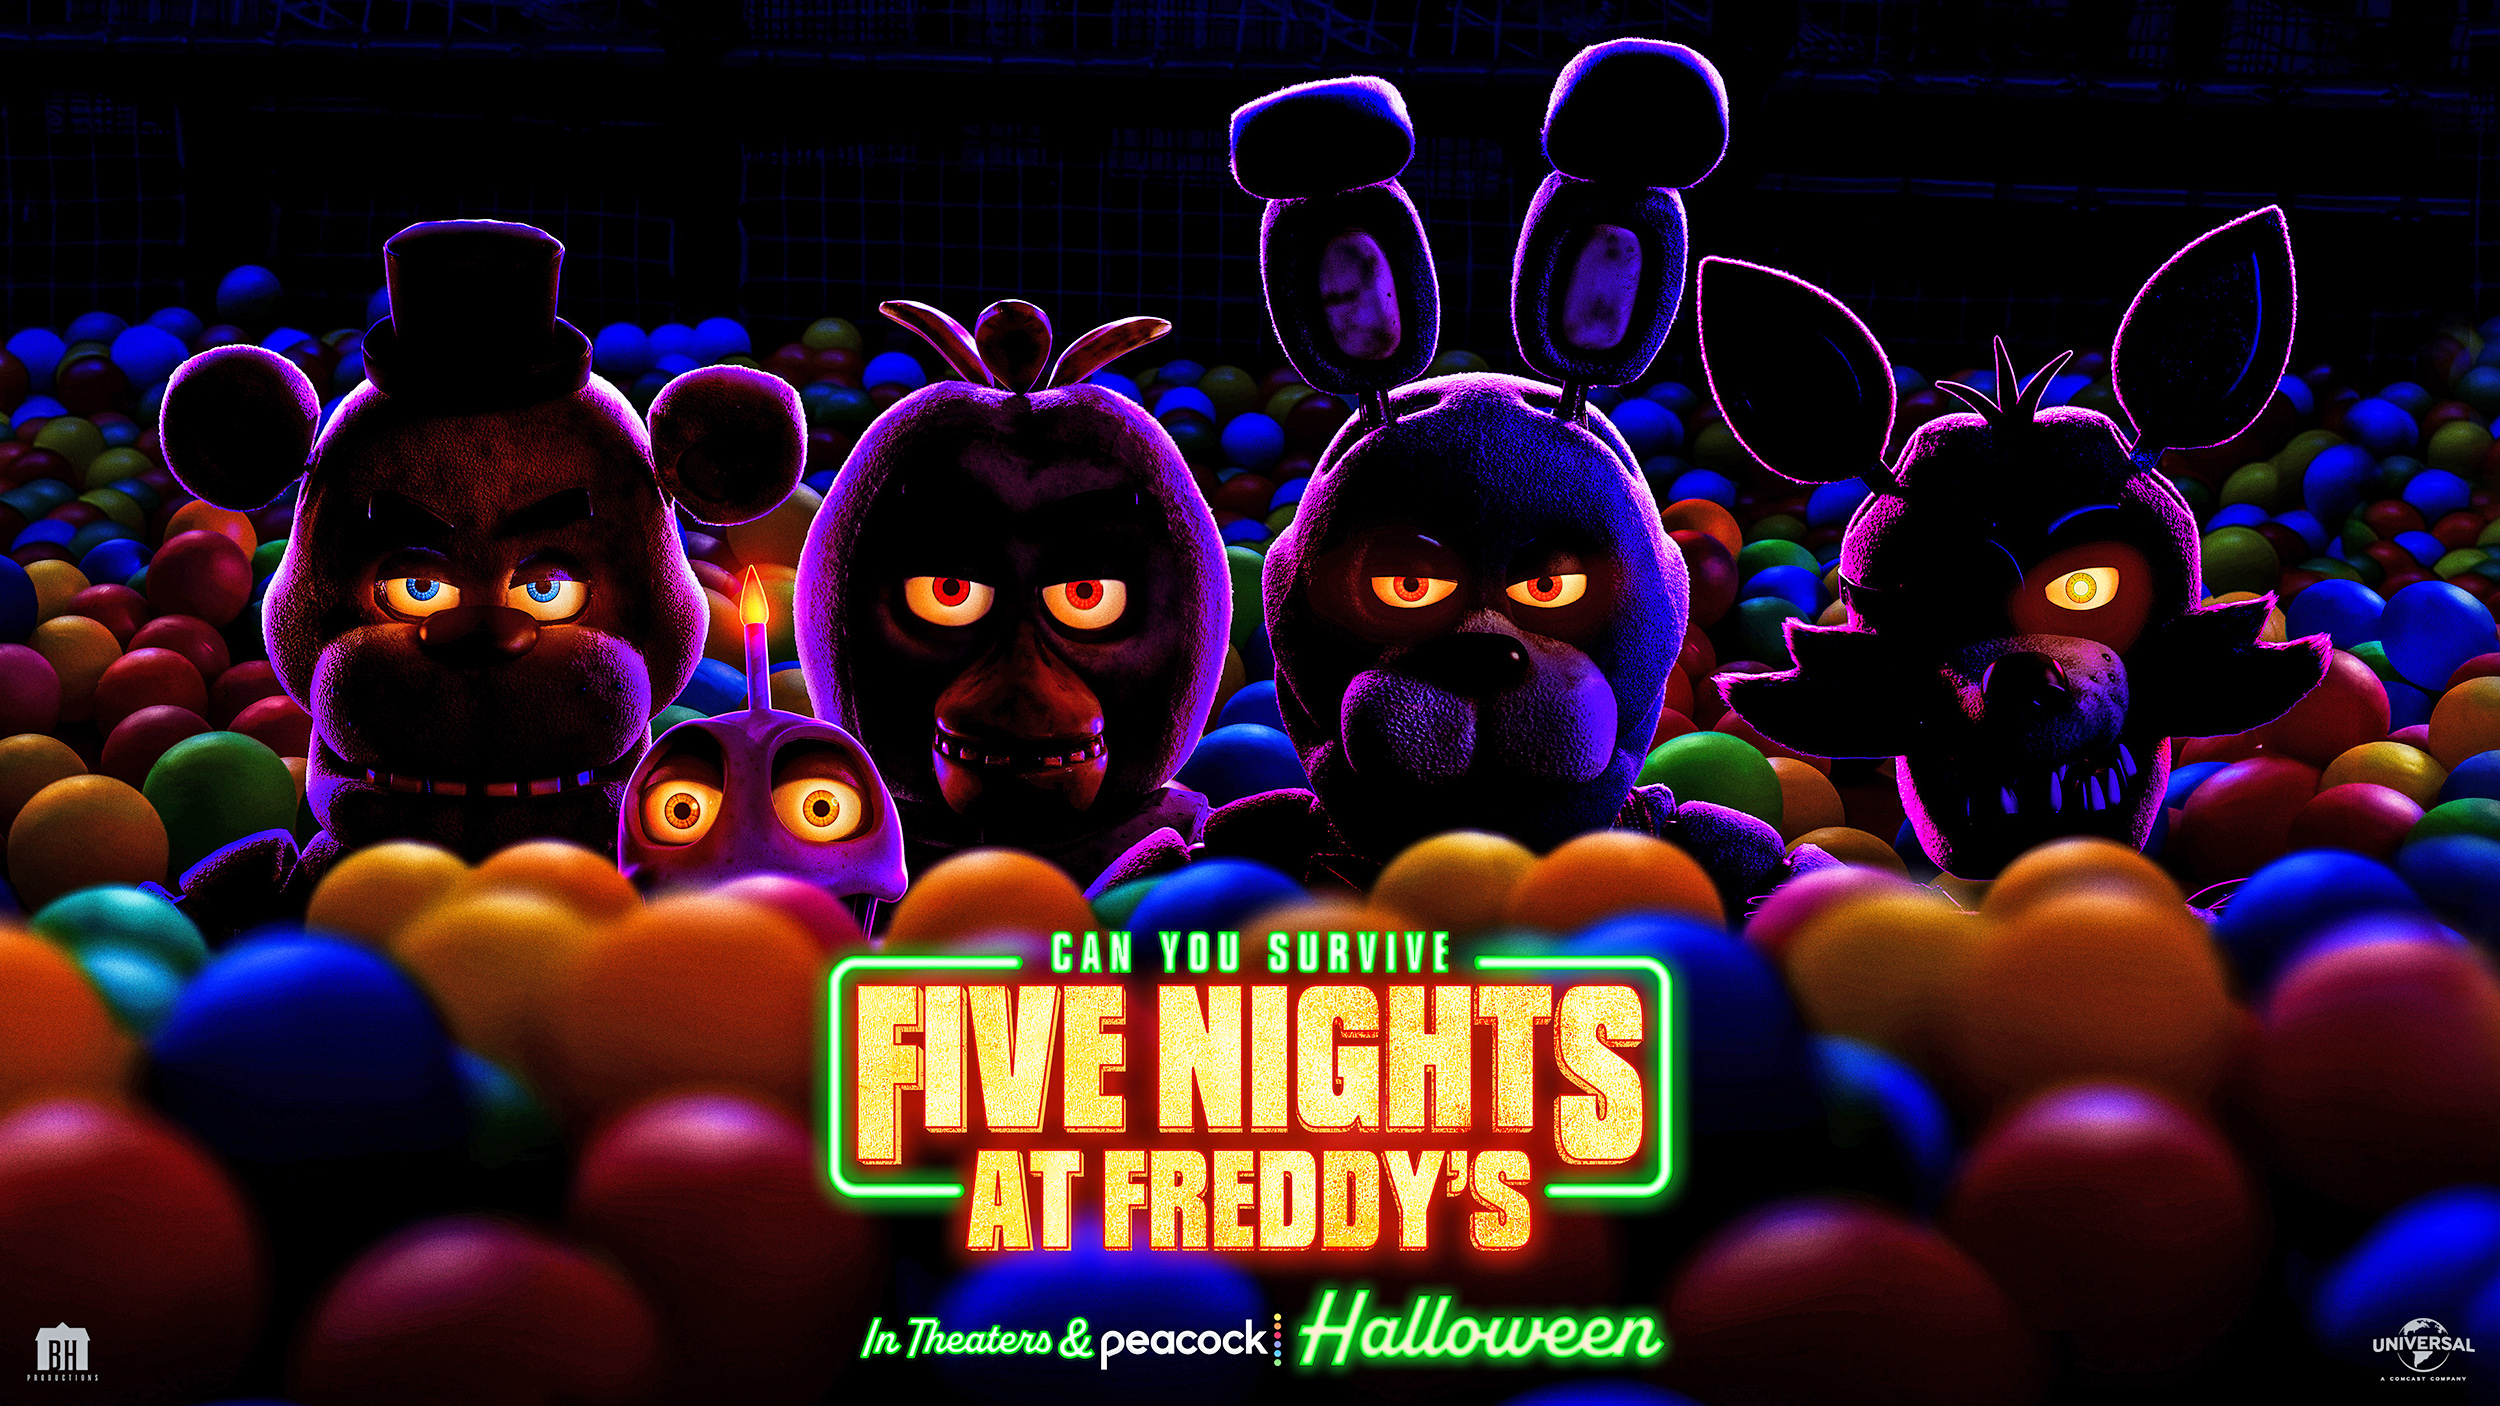 Why is nights at freddys pg